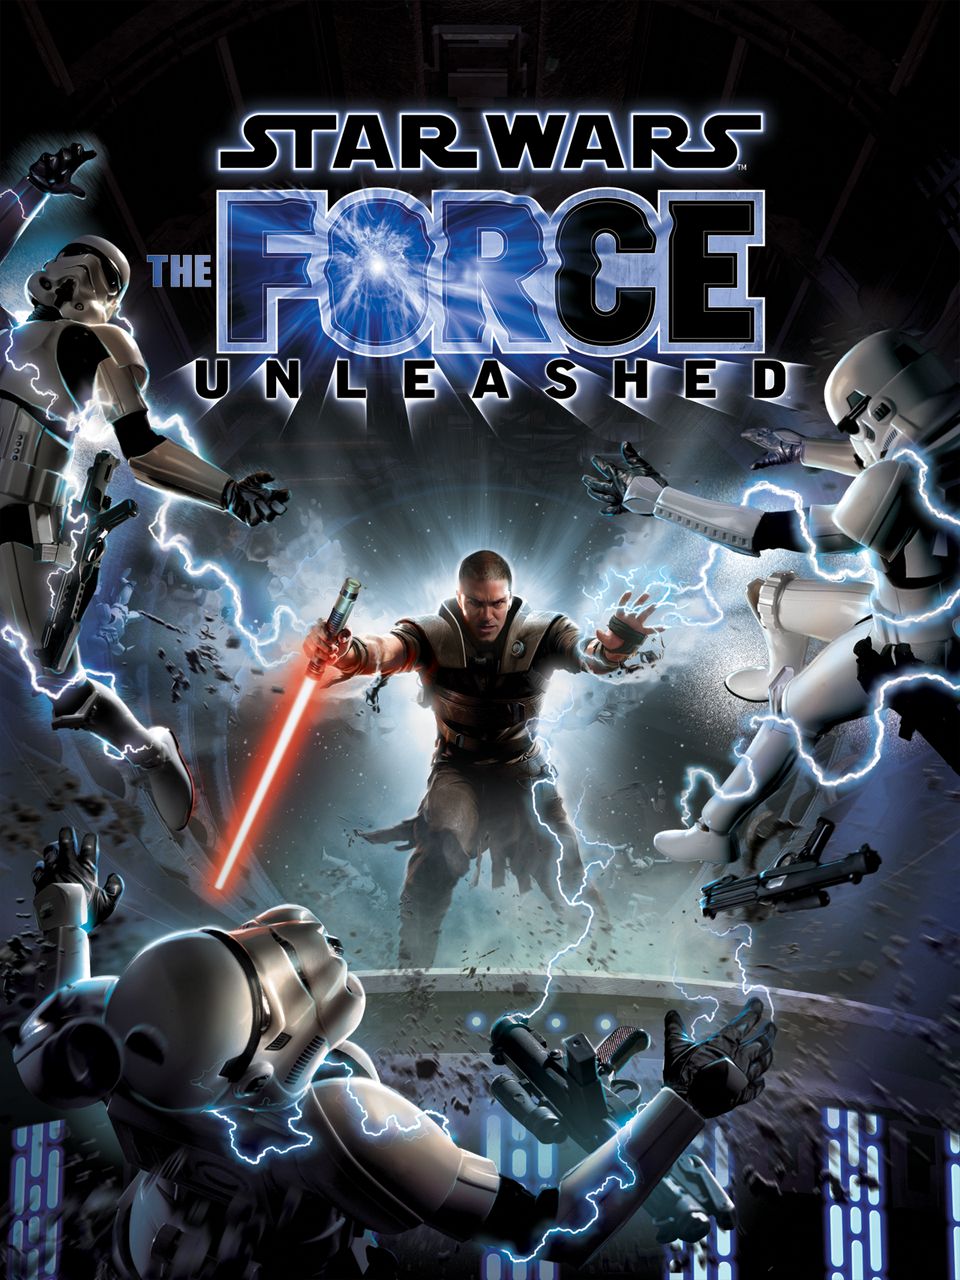 5. "Star Wars: The Force Unleashed"